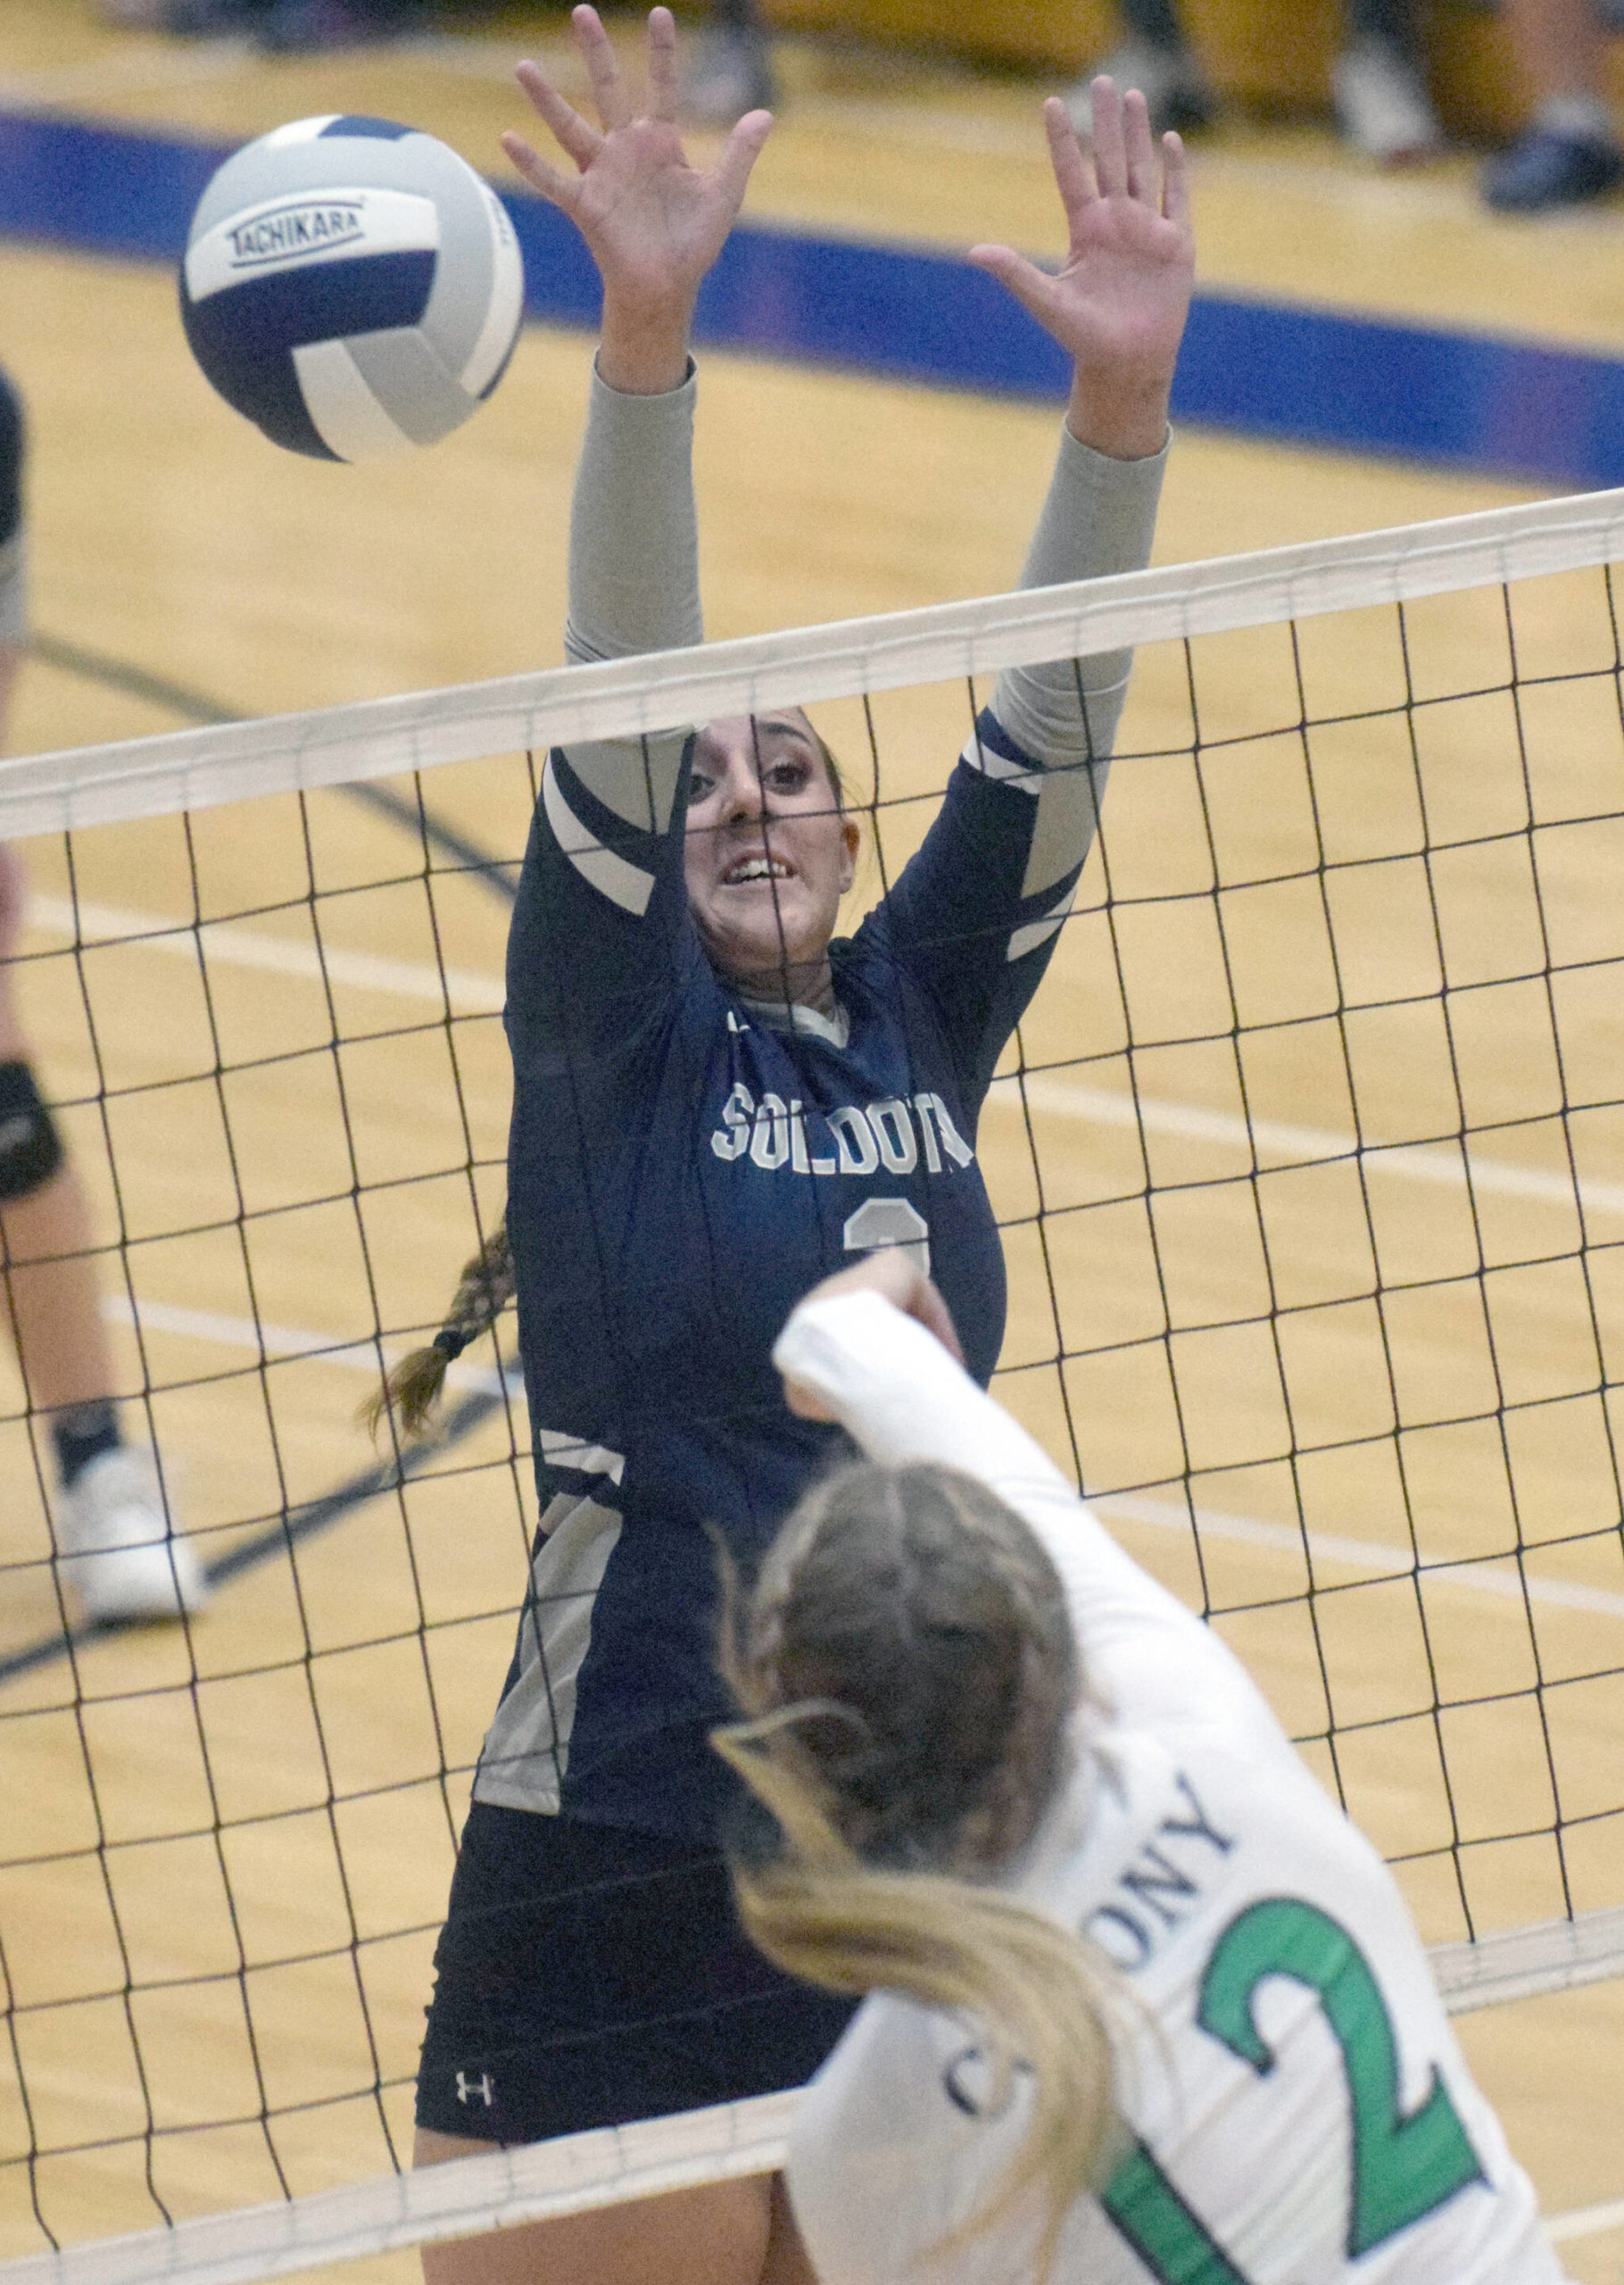 Soldotna’s Ashlee Anderson throws up a block on Colony’s Taylee Weiss on Thursday, Sept. 9, 2021, at Soldotna High School in Soldotna, Alaska. (Photo by Jeff Helminiak/Peninsula Clarion)